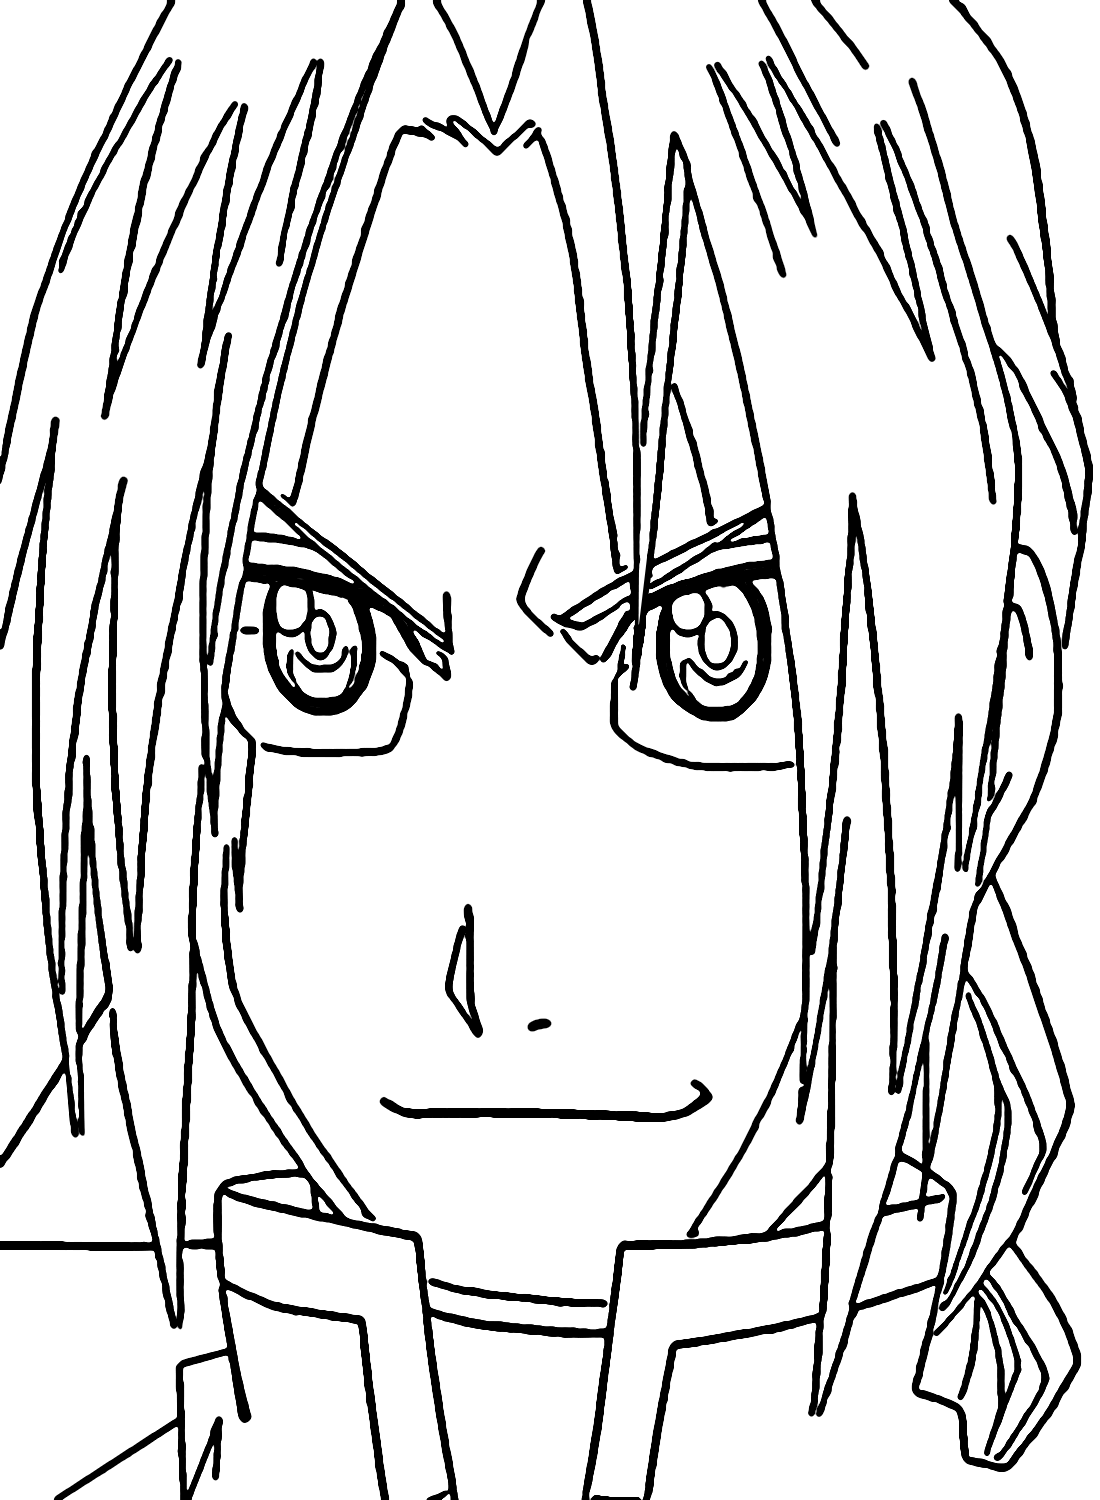 Edward in Fullmetal Alchemist Coloring Pages